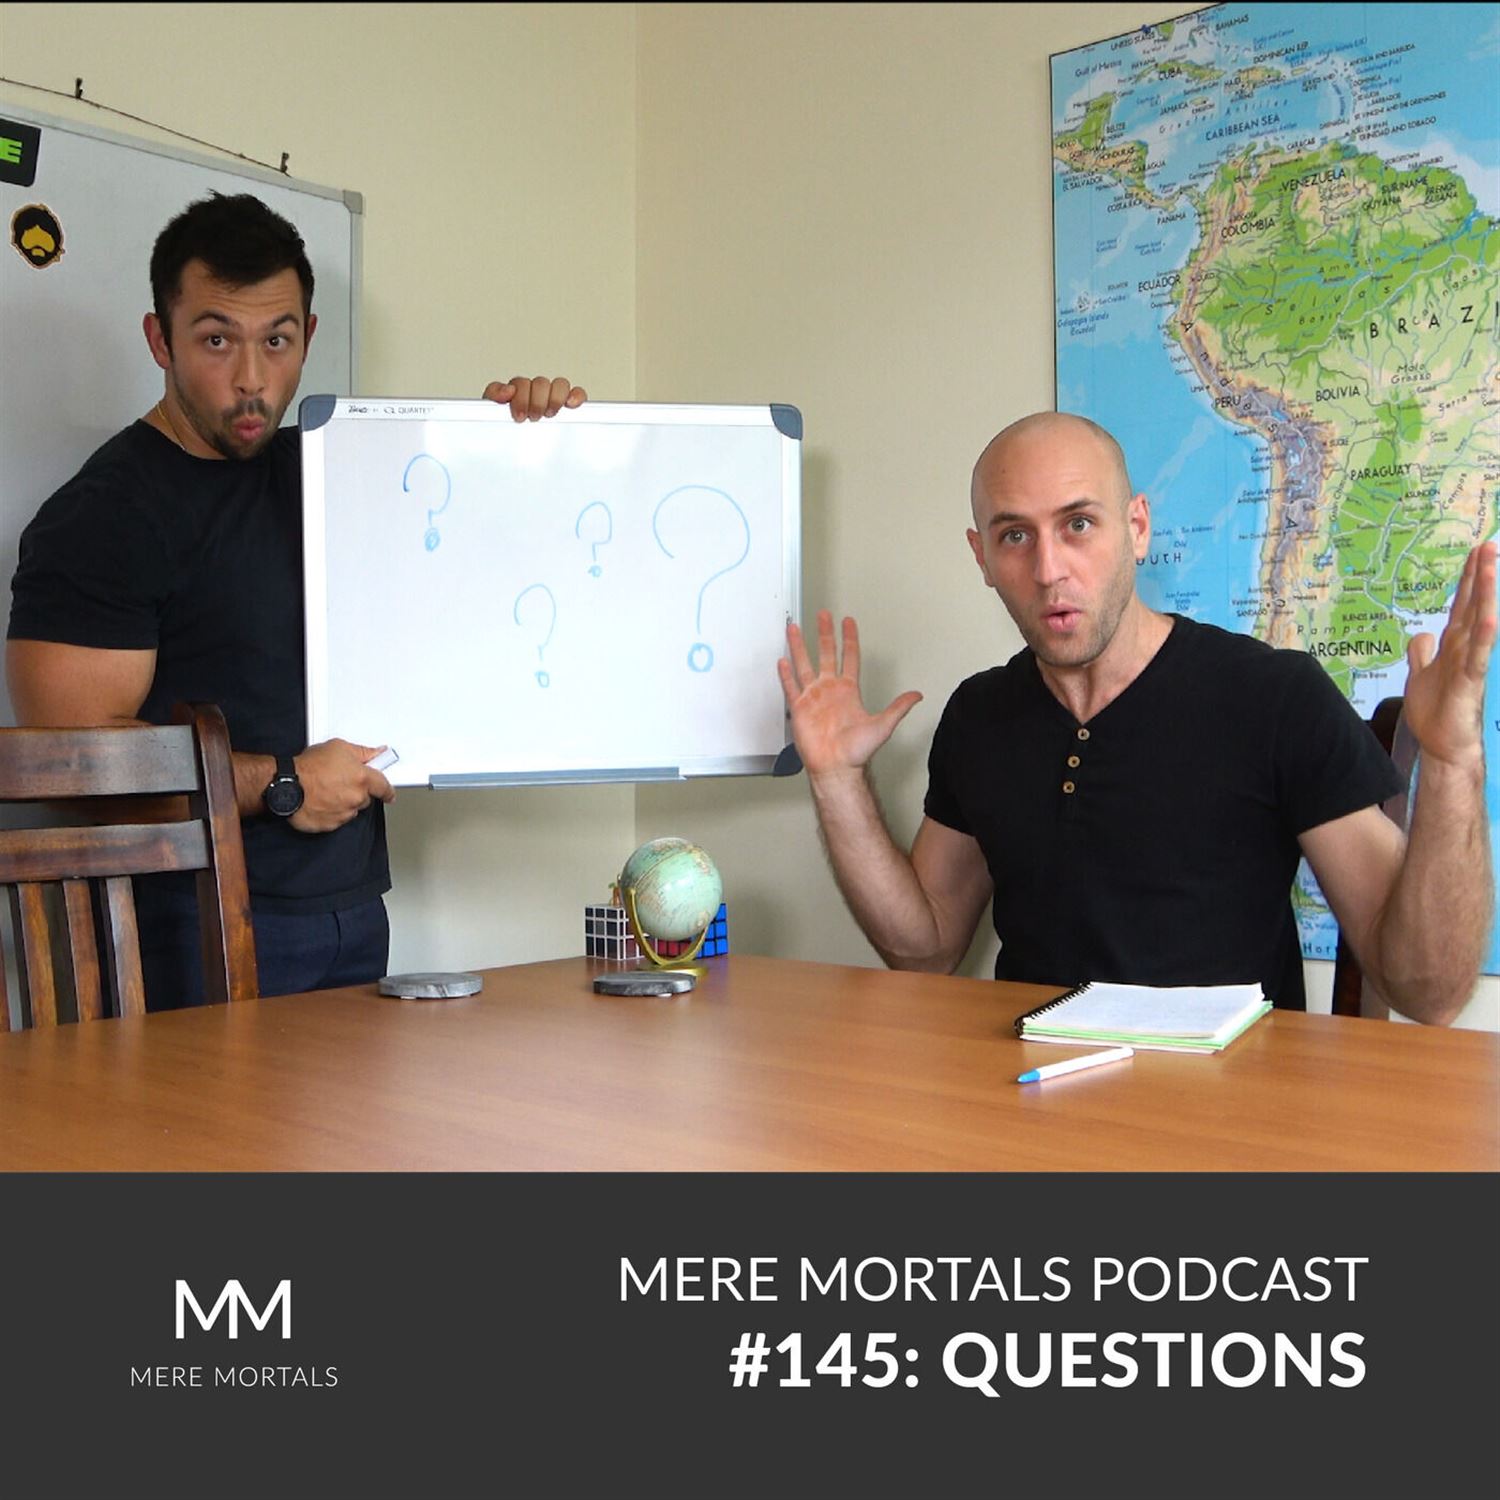 What Makes A Terrible Question? (Episode #145 - Questions)